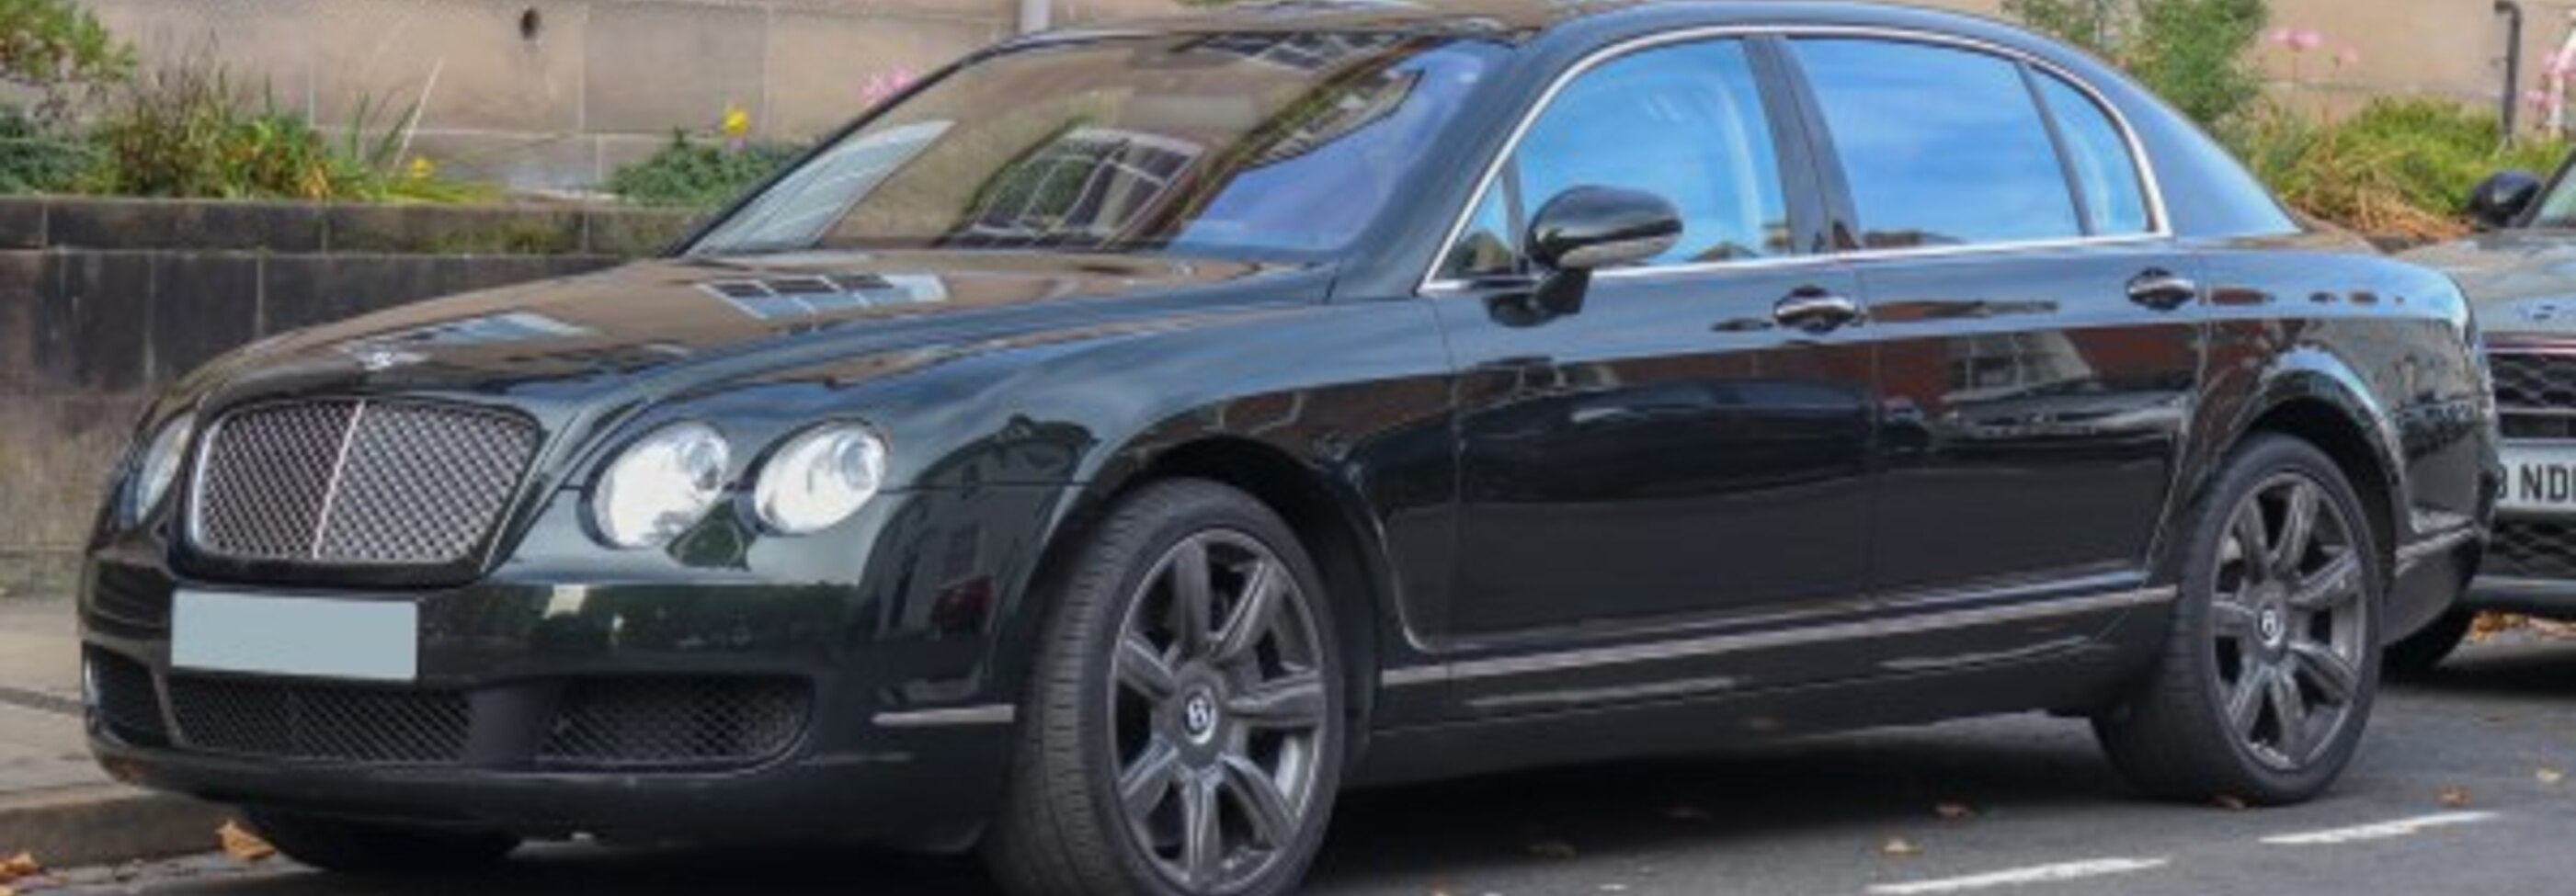 Bentley Continental Flying Spur 6.0 i W12 48V (560 Hp) 2005, 2006, 2007, 2008, 2009, 2010, 2011, 2012, 2013 